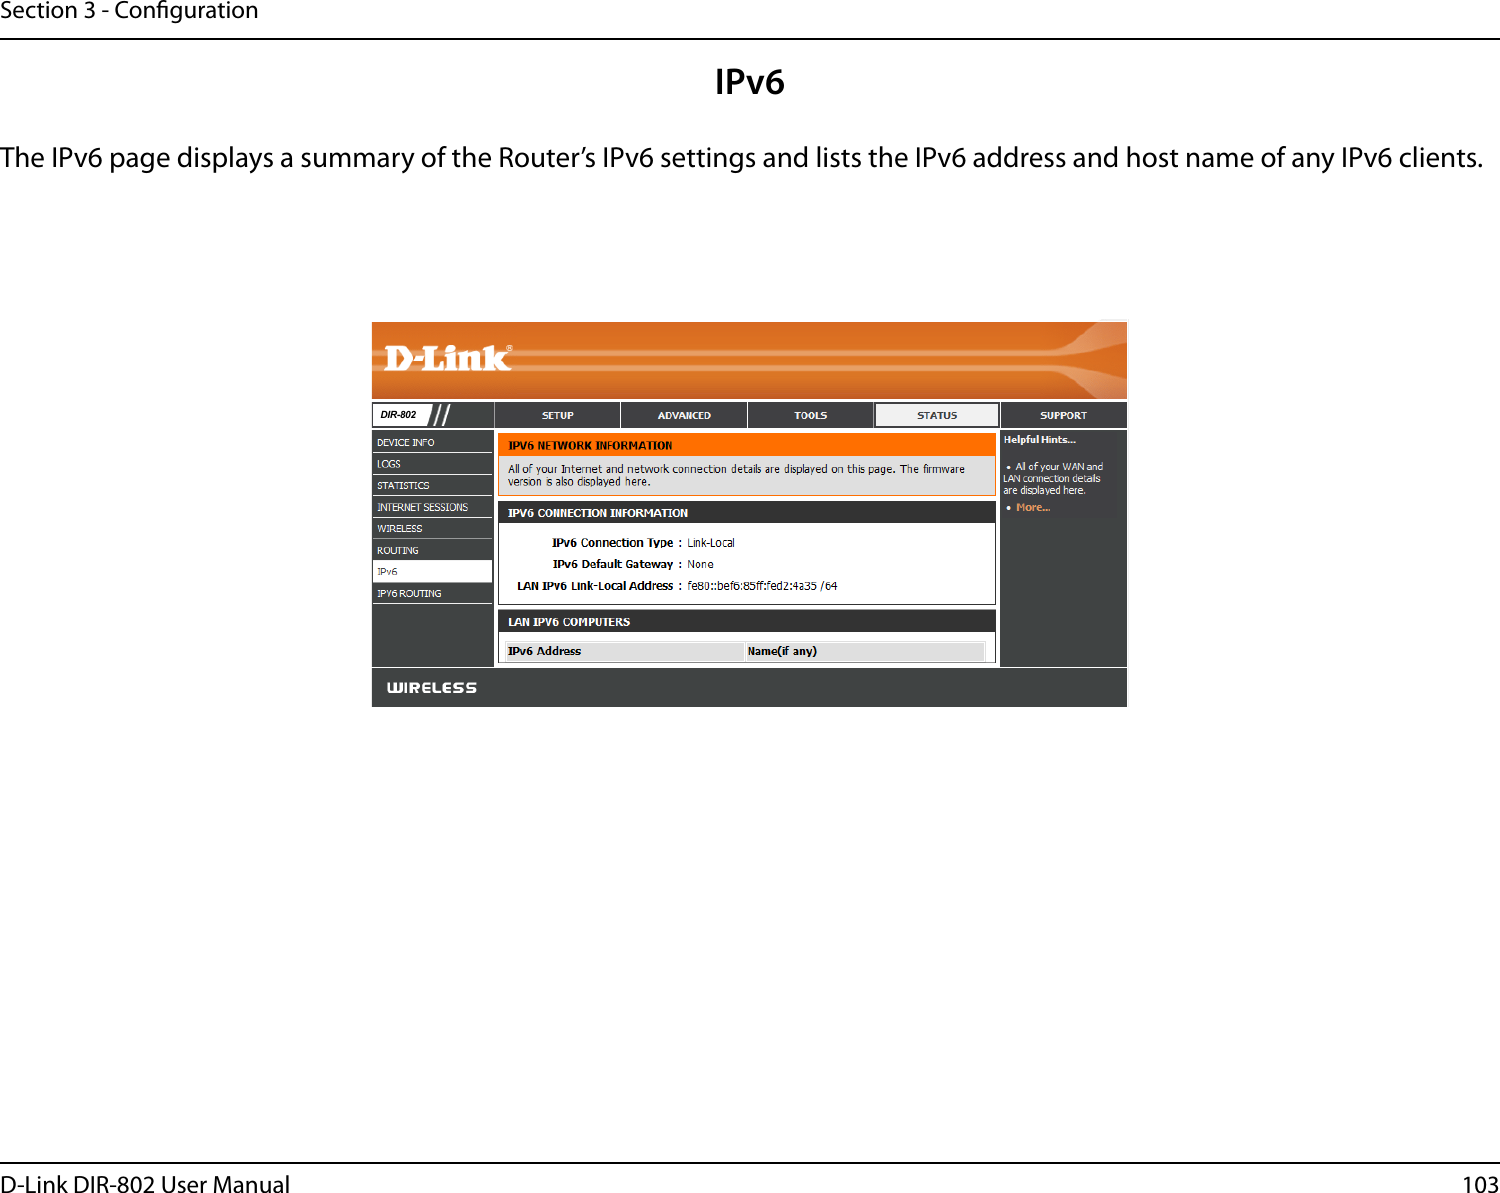 103D-Link DIR-802 User ManualSection 3 - CongurationIPv6The IPv6 page displays a summary of the Router’s IPv6 settings and lists the IPv6 address and host name of any IPv6 clients. DIR-802